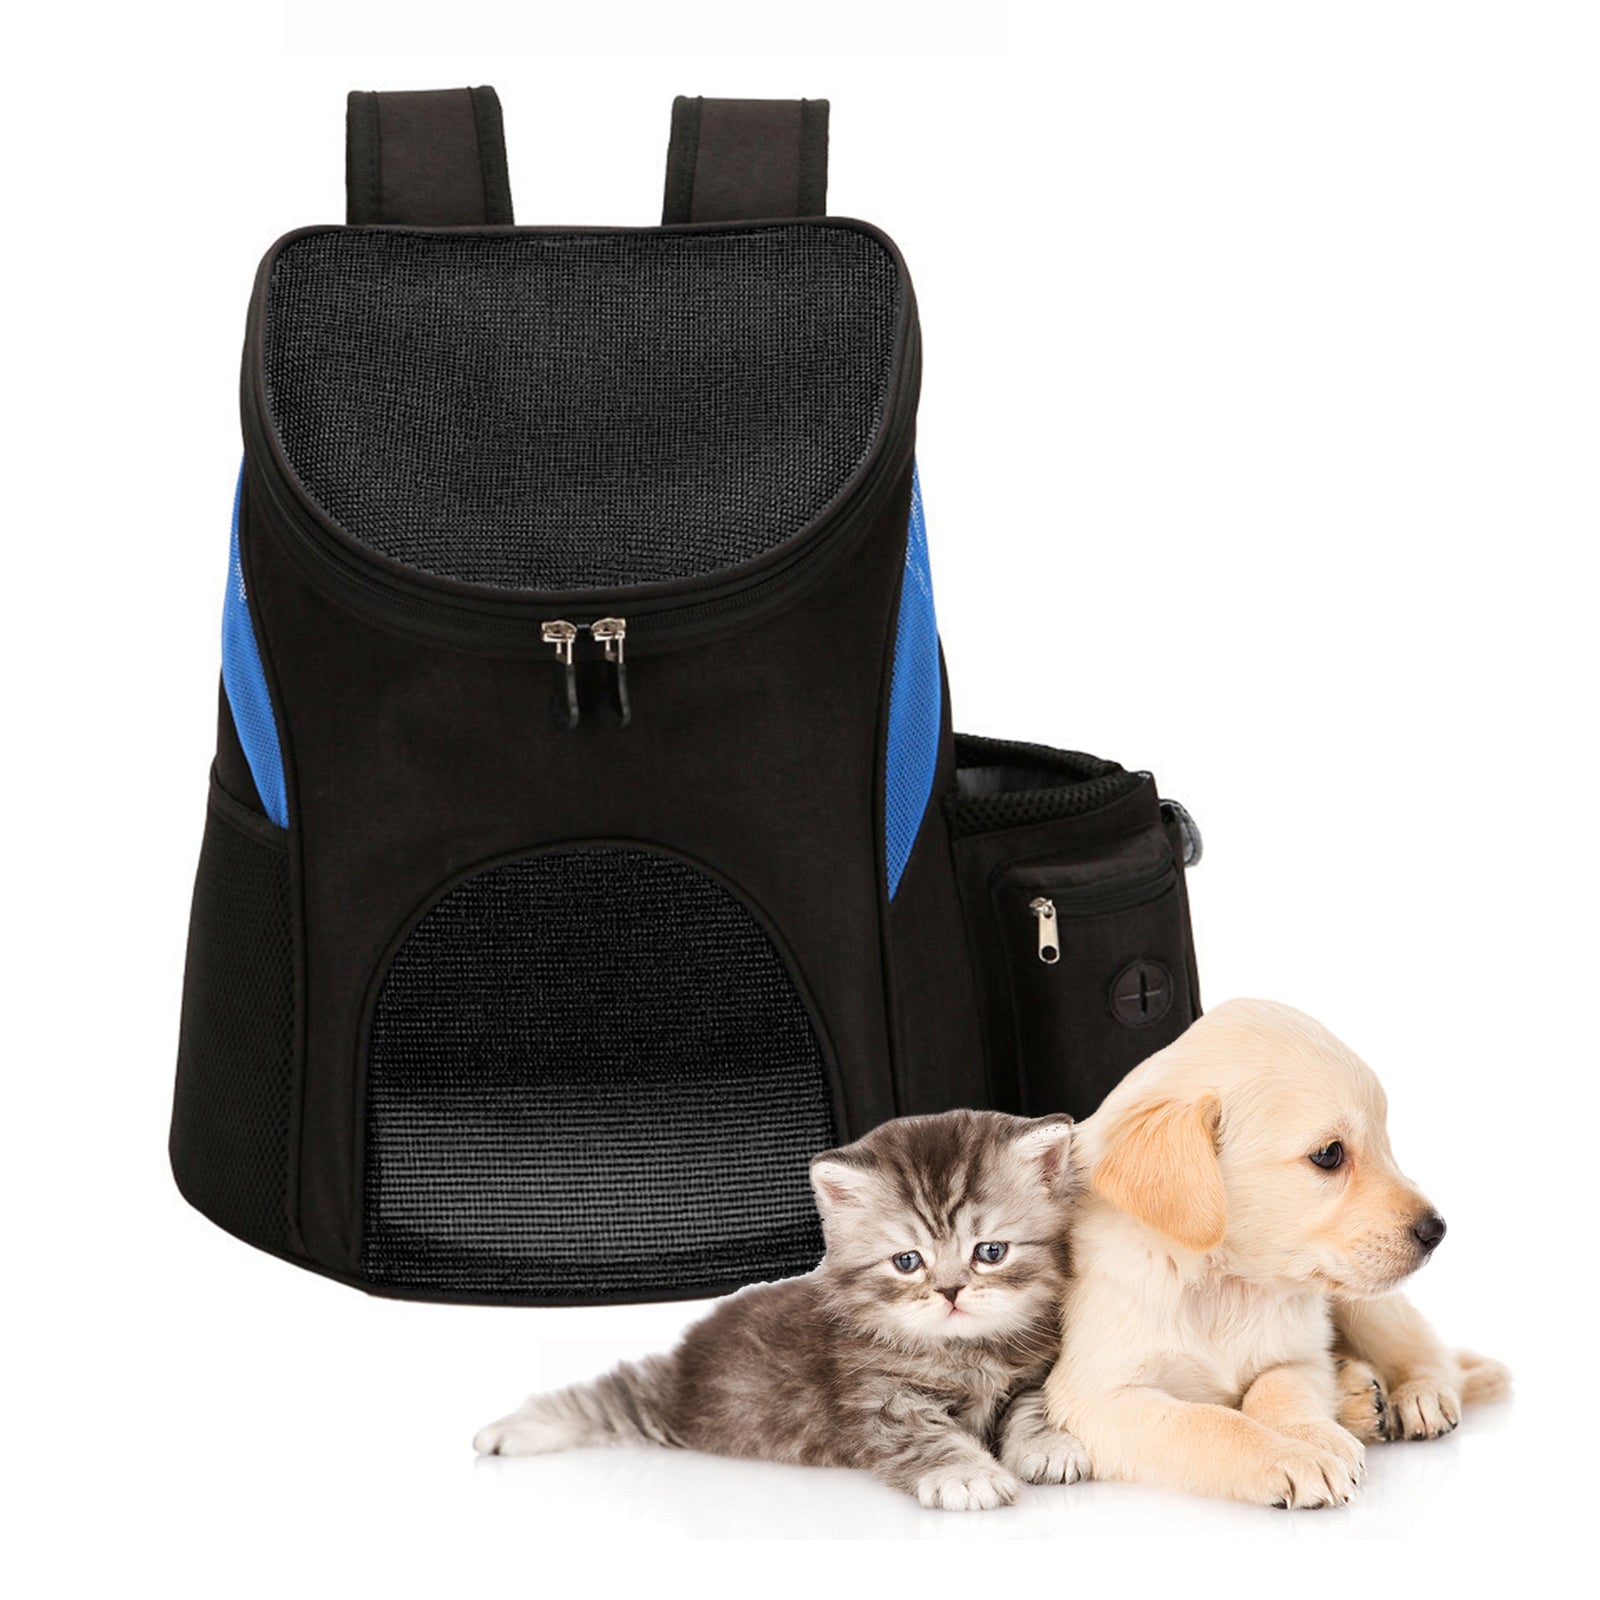 Tomfoto Pet Backpack Dog Cat Carrier with Double Zip Clear Window Side Pockets Pet Travel Shoulder Bag  Open Doors for Comfortable Travelling Hiking Outdoor Use